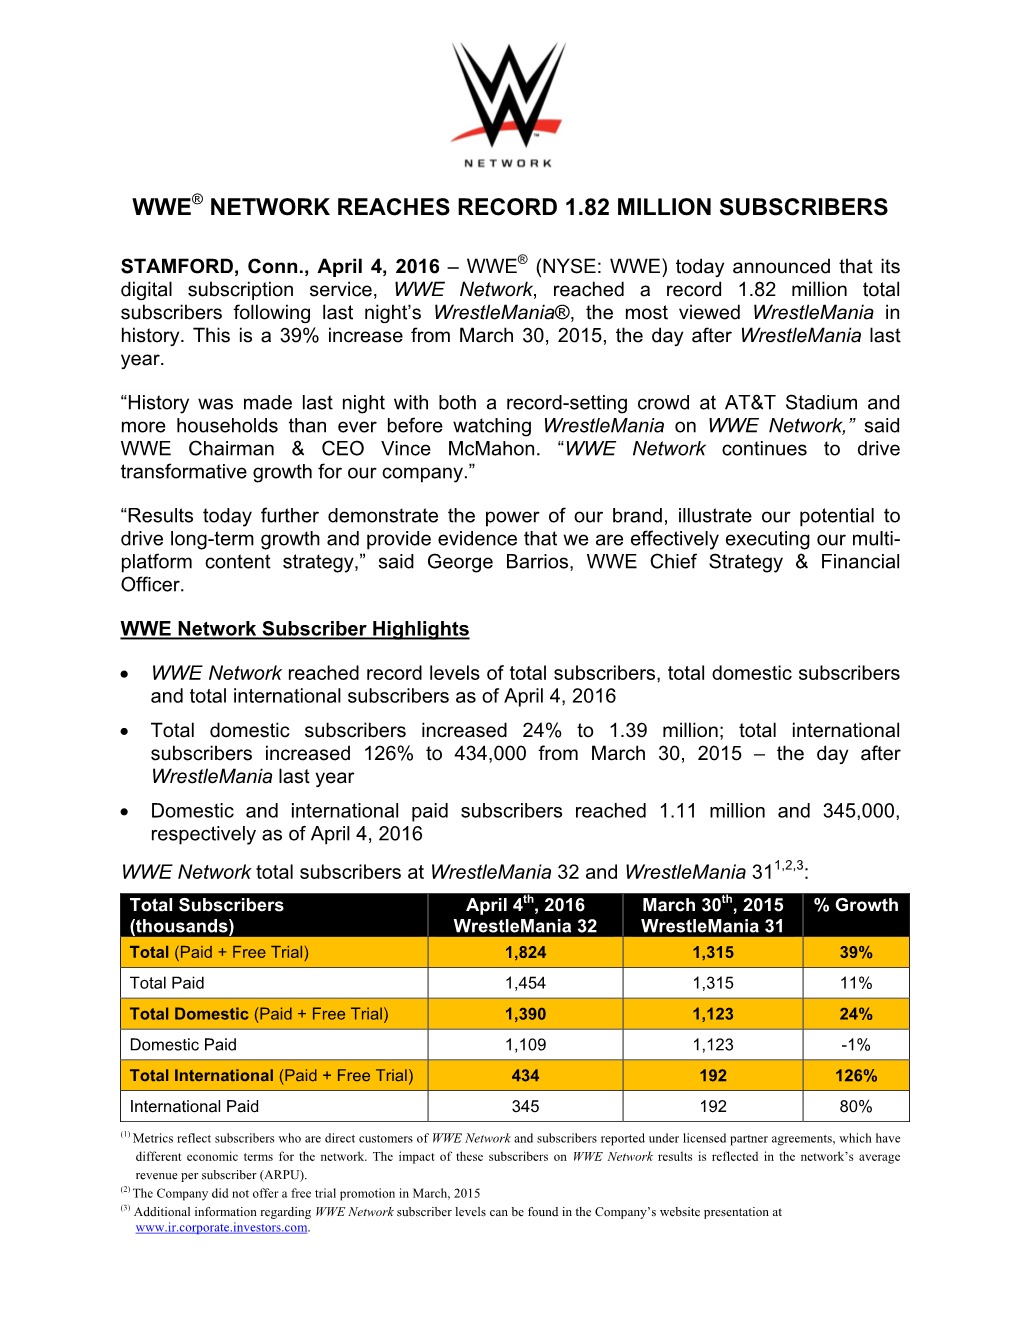 Wwe Network Reaches Record 1.82 Million